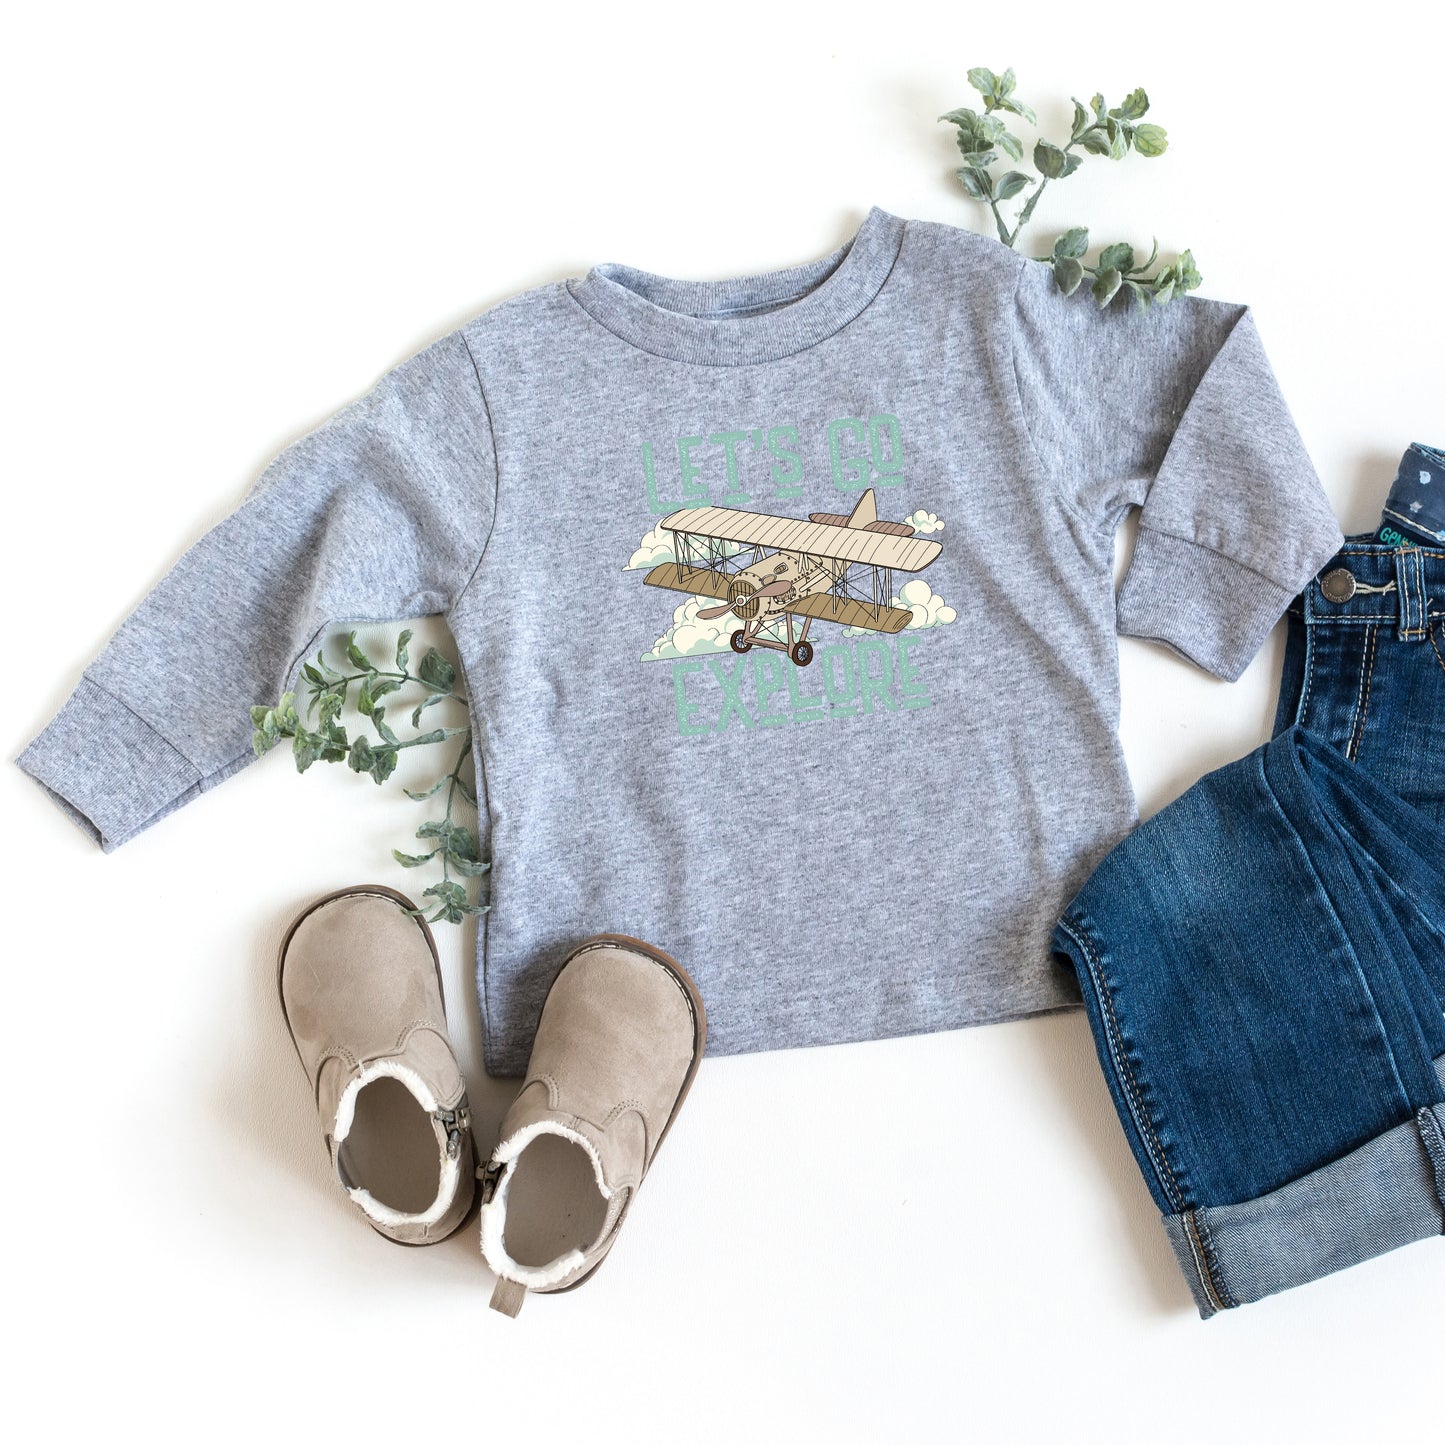 Let's Go Explore | Toddler Long Sleeve Tee